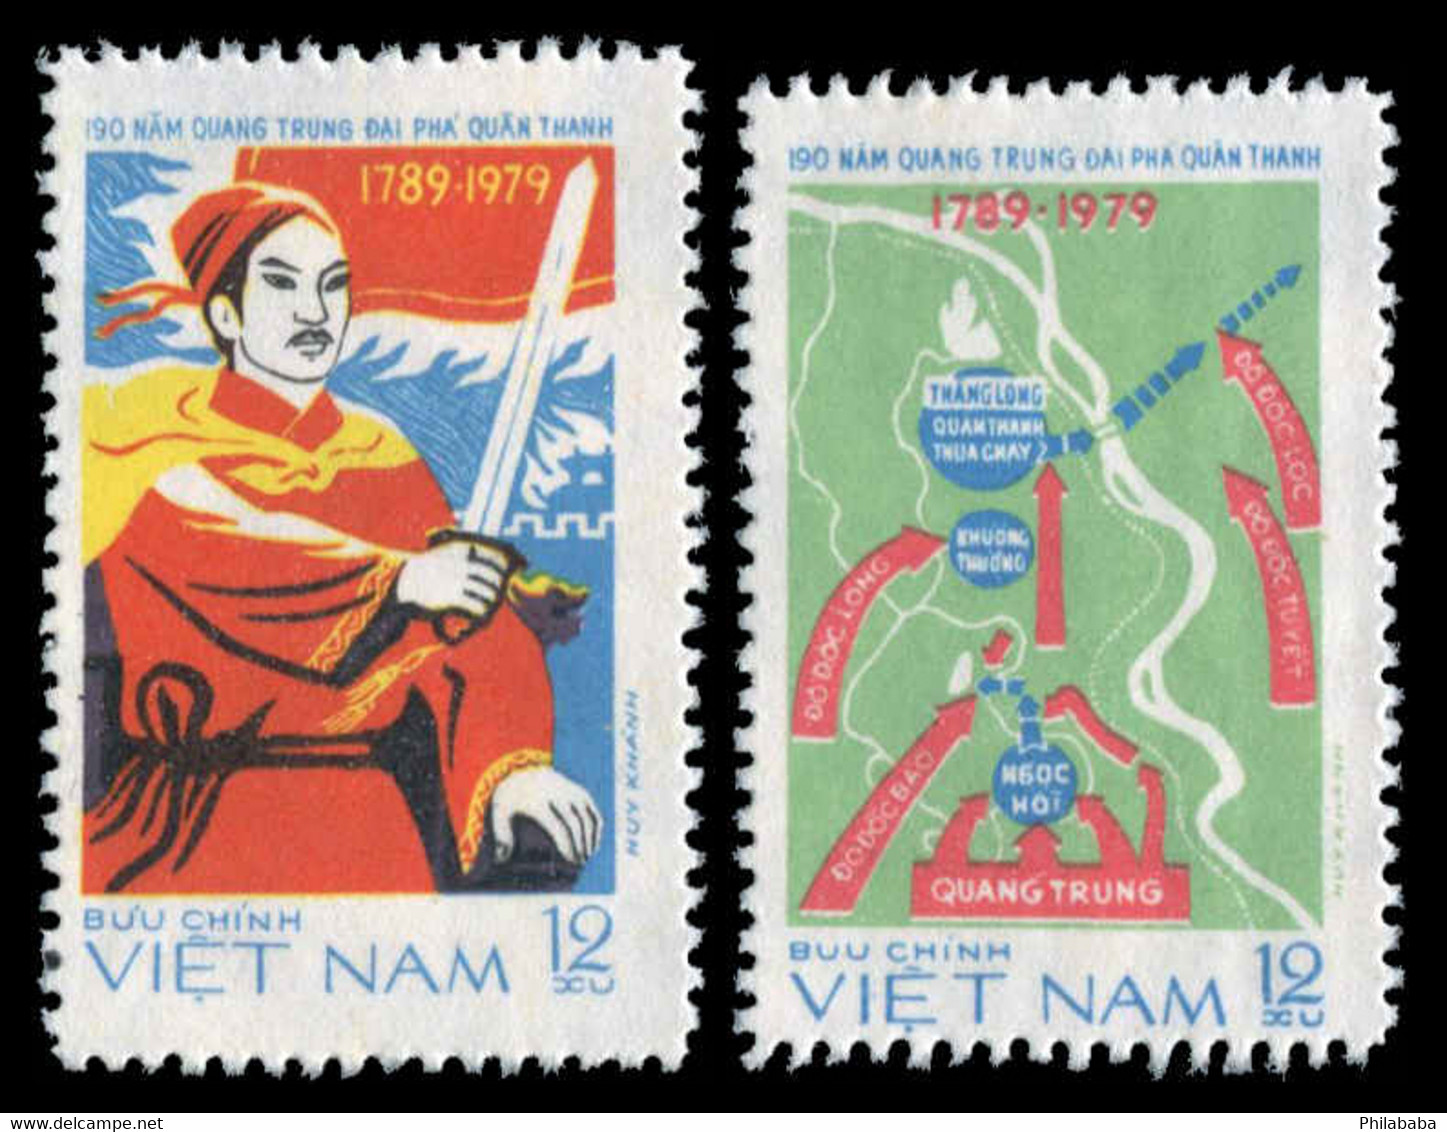 Vietnam 1979 Mi# 1016/17 No Gum (as Issued) 190th Anniversary Of Quang Trung's Victory Over The Thanh - Vietnam